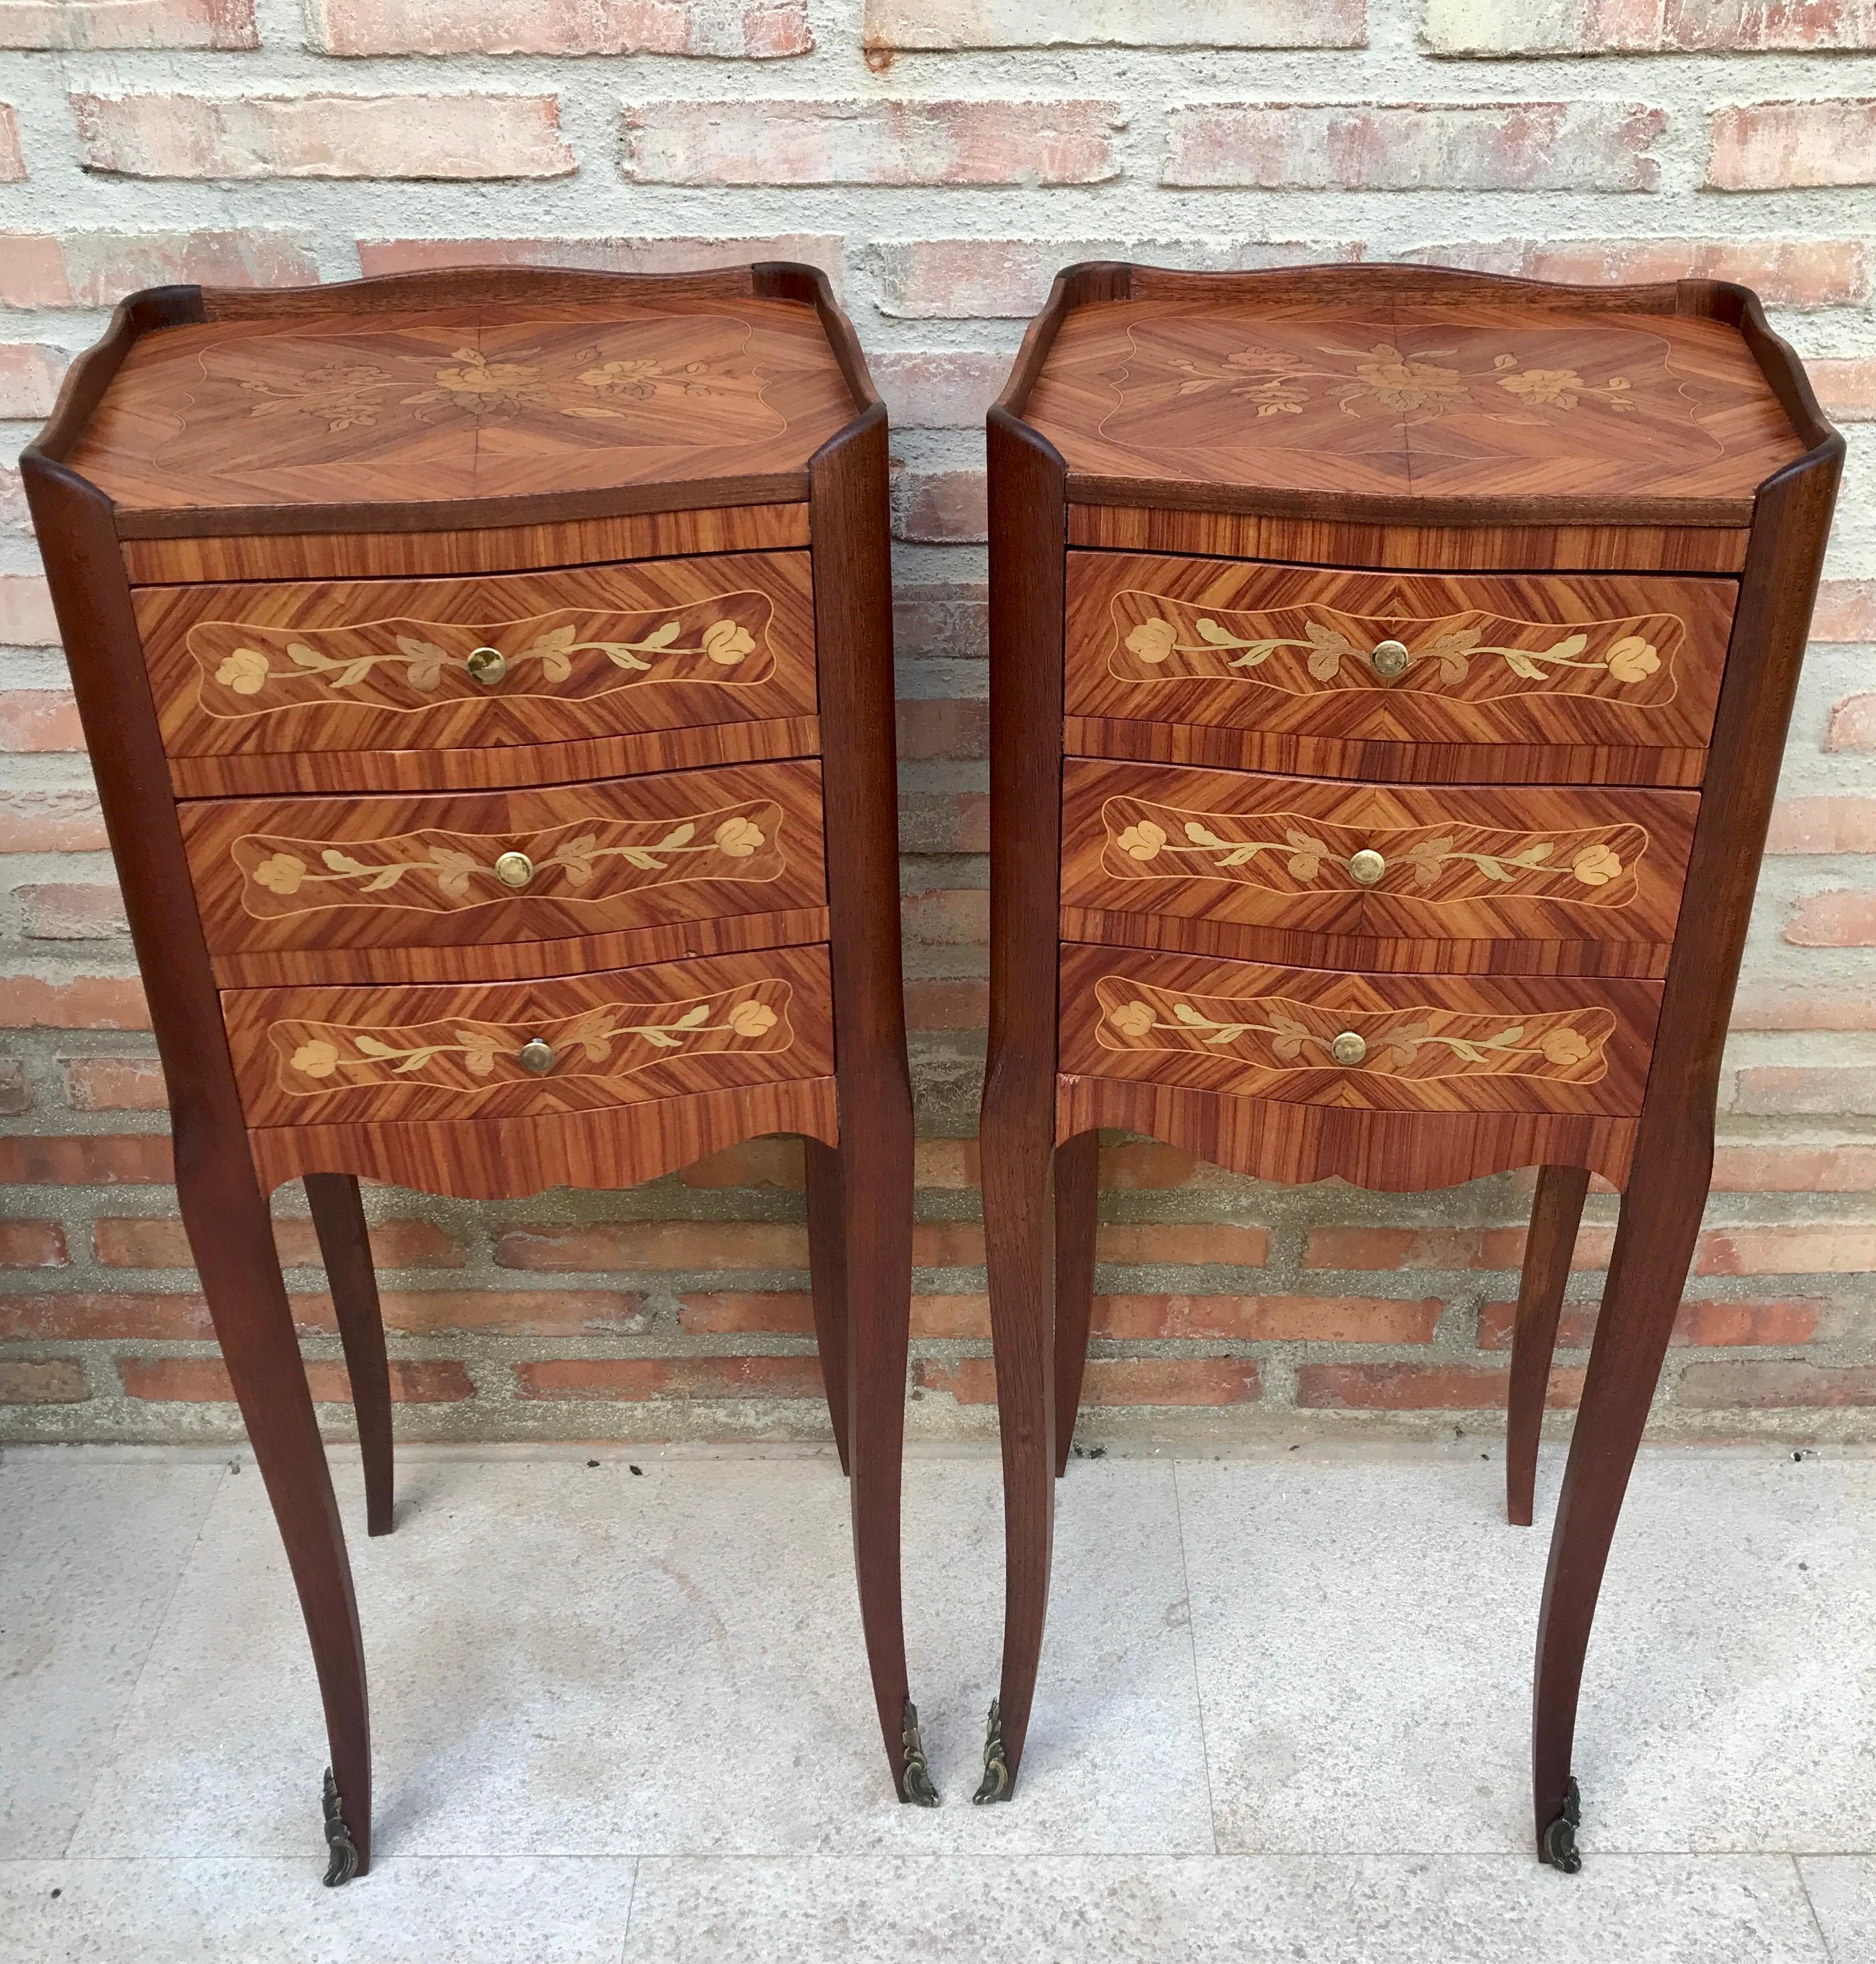 French Provincial Early 20th Century French Bedside Tables in Marquetry & Bronze with Iron Details For Sale